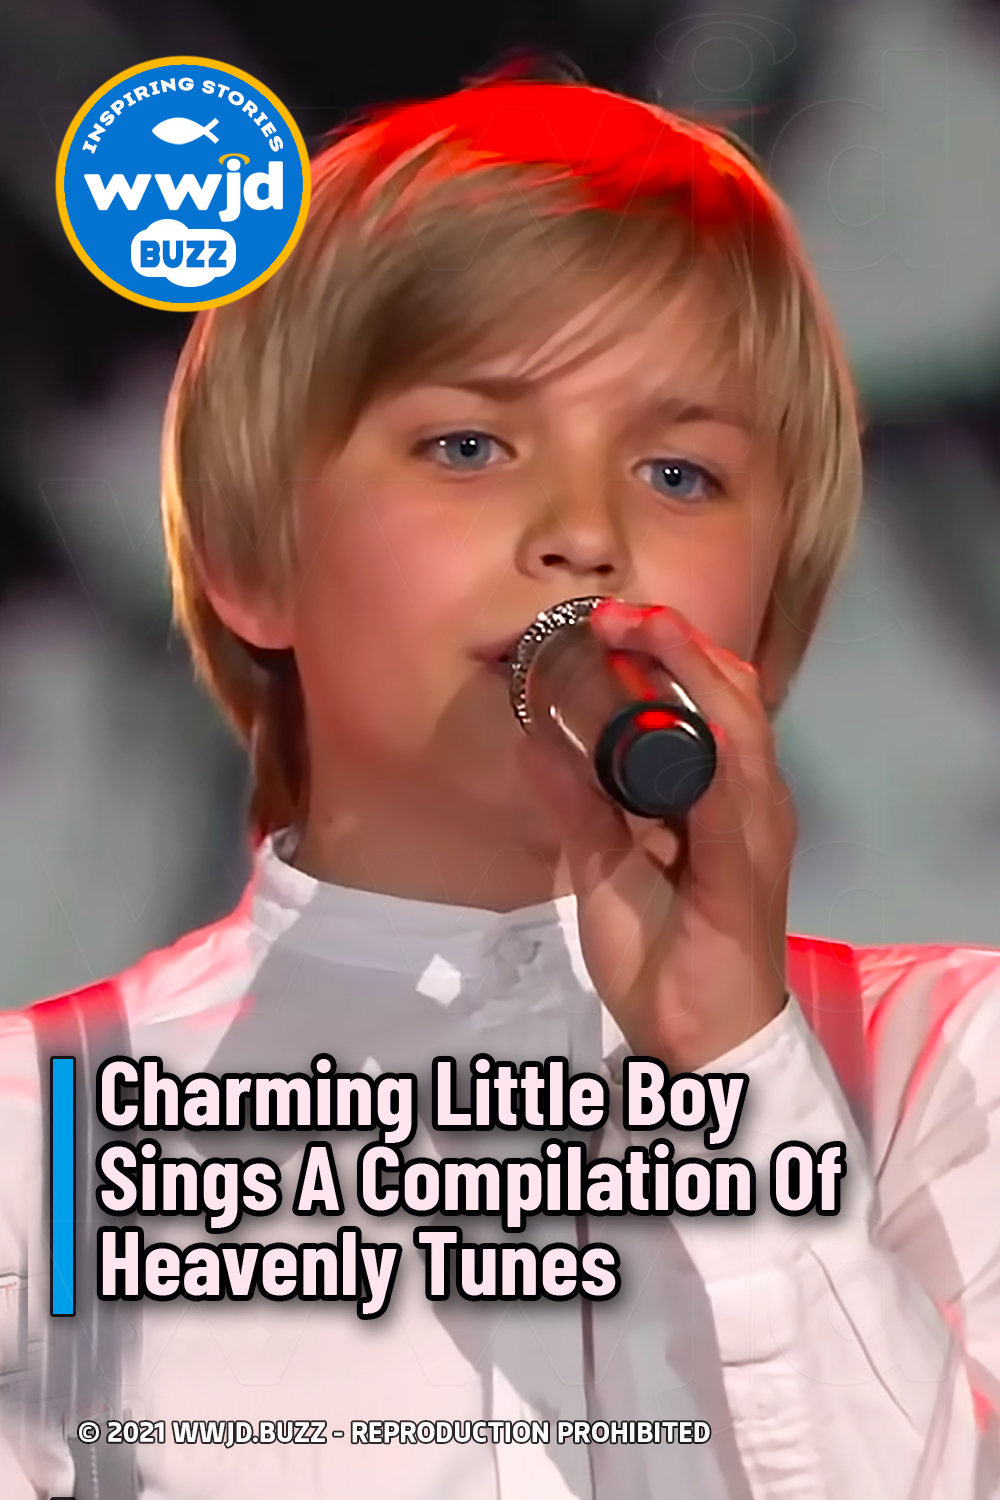 Charming Little Boy Sings A Compilation Of Heavenly Tunes